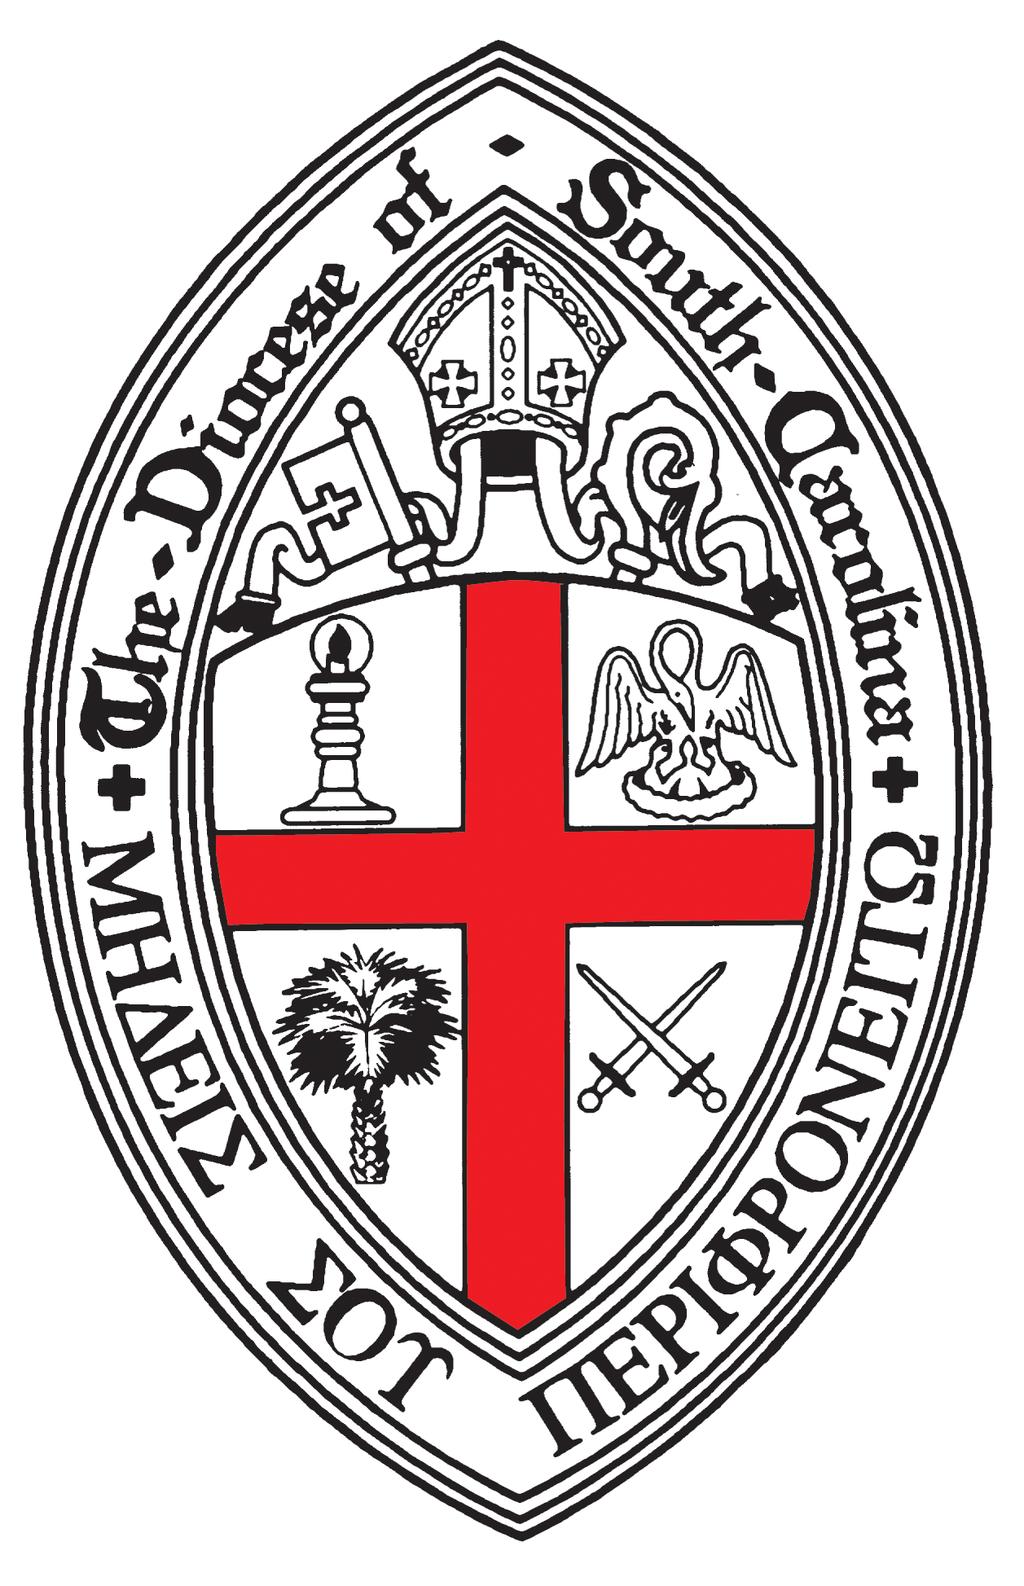 DIOCESE OF SOUTH CAROLINA CONSTITUTION Article I - Of Diocesan Convention Meetings A-1 Article II - Of Diocesan Convention Members A-1 Article III - Of a Quorum A-2 Article IV - Of the President A-2